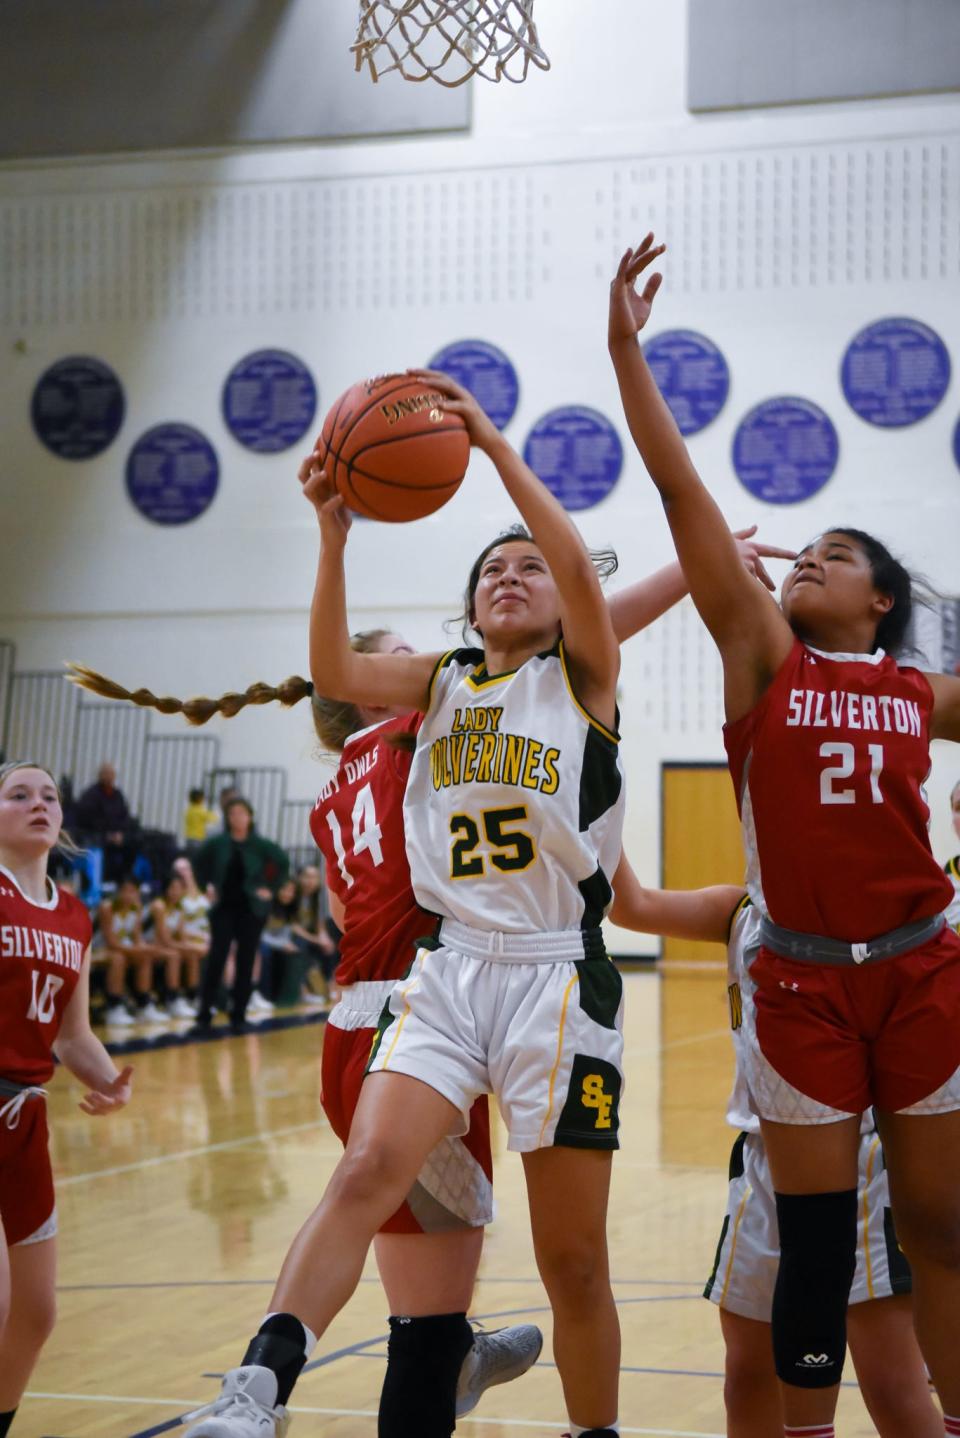 Springlake-Earth's Emma Samaron (25) attempts a layup during Springlake-Earth's 61-44 win over Silverton in a girls' 1A area round on Feb. 18, 2022, at Canyon High School.